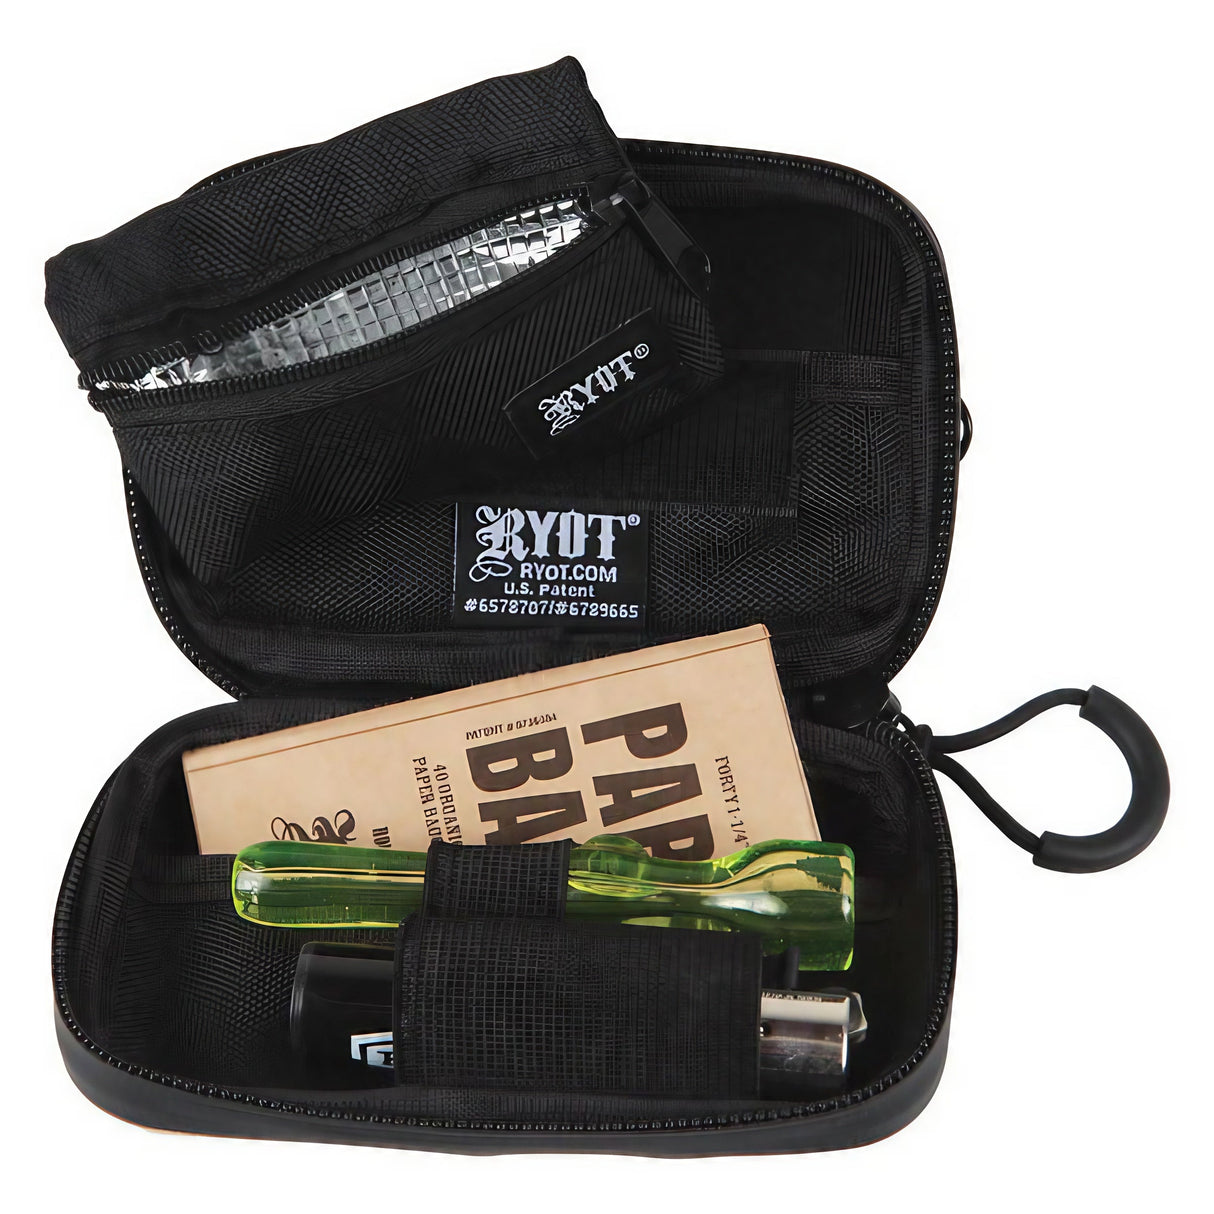 RYOT SmellSafe Hardshell Krypto-Kit open view displaying storage compartments and included accessories